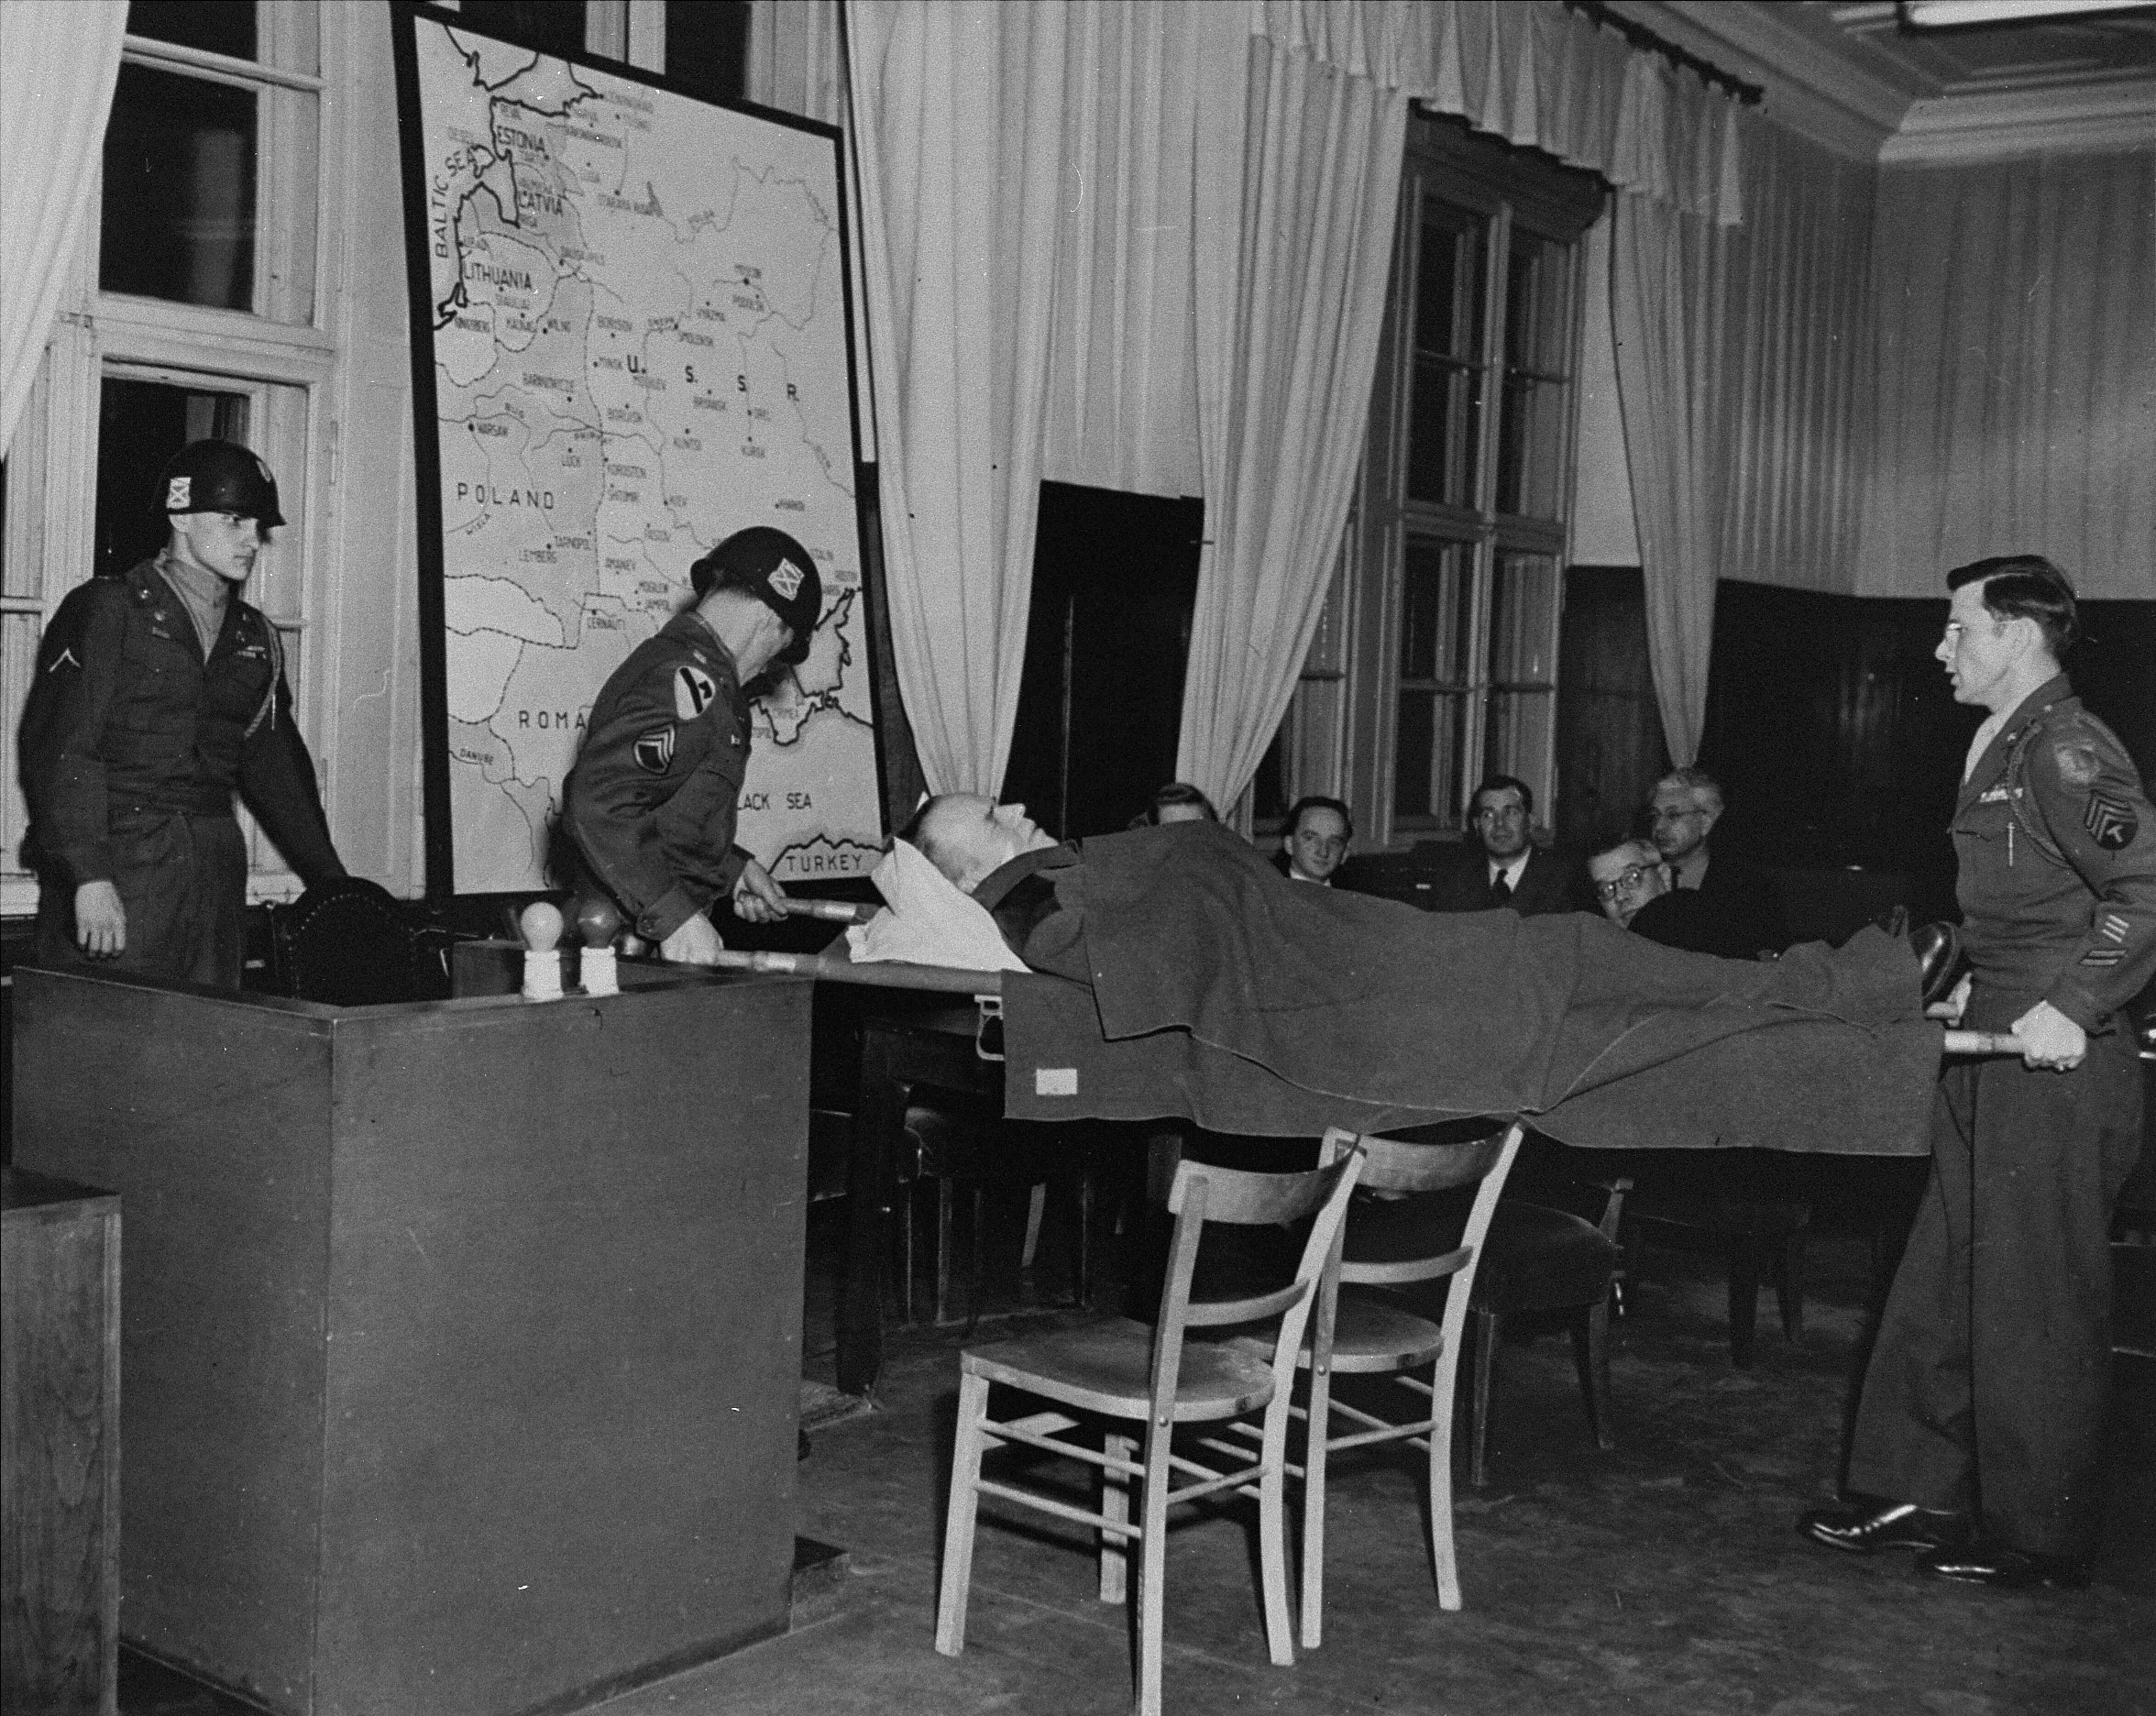 Defendant Otto Rasch gives testimony in a smaller courtroom in the Palace of Justice during the Einsatzgruppen Trial.  

Due to his mental and physical instability, the case against him was discontinued on 5 February 1948 and he subsequently died on 1 November 1948.